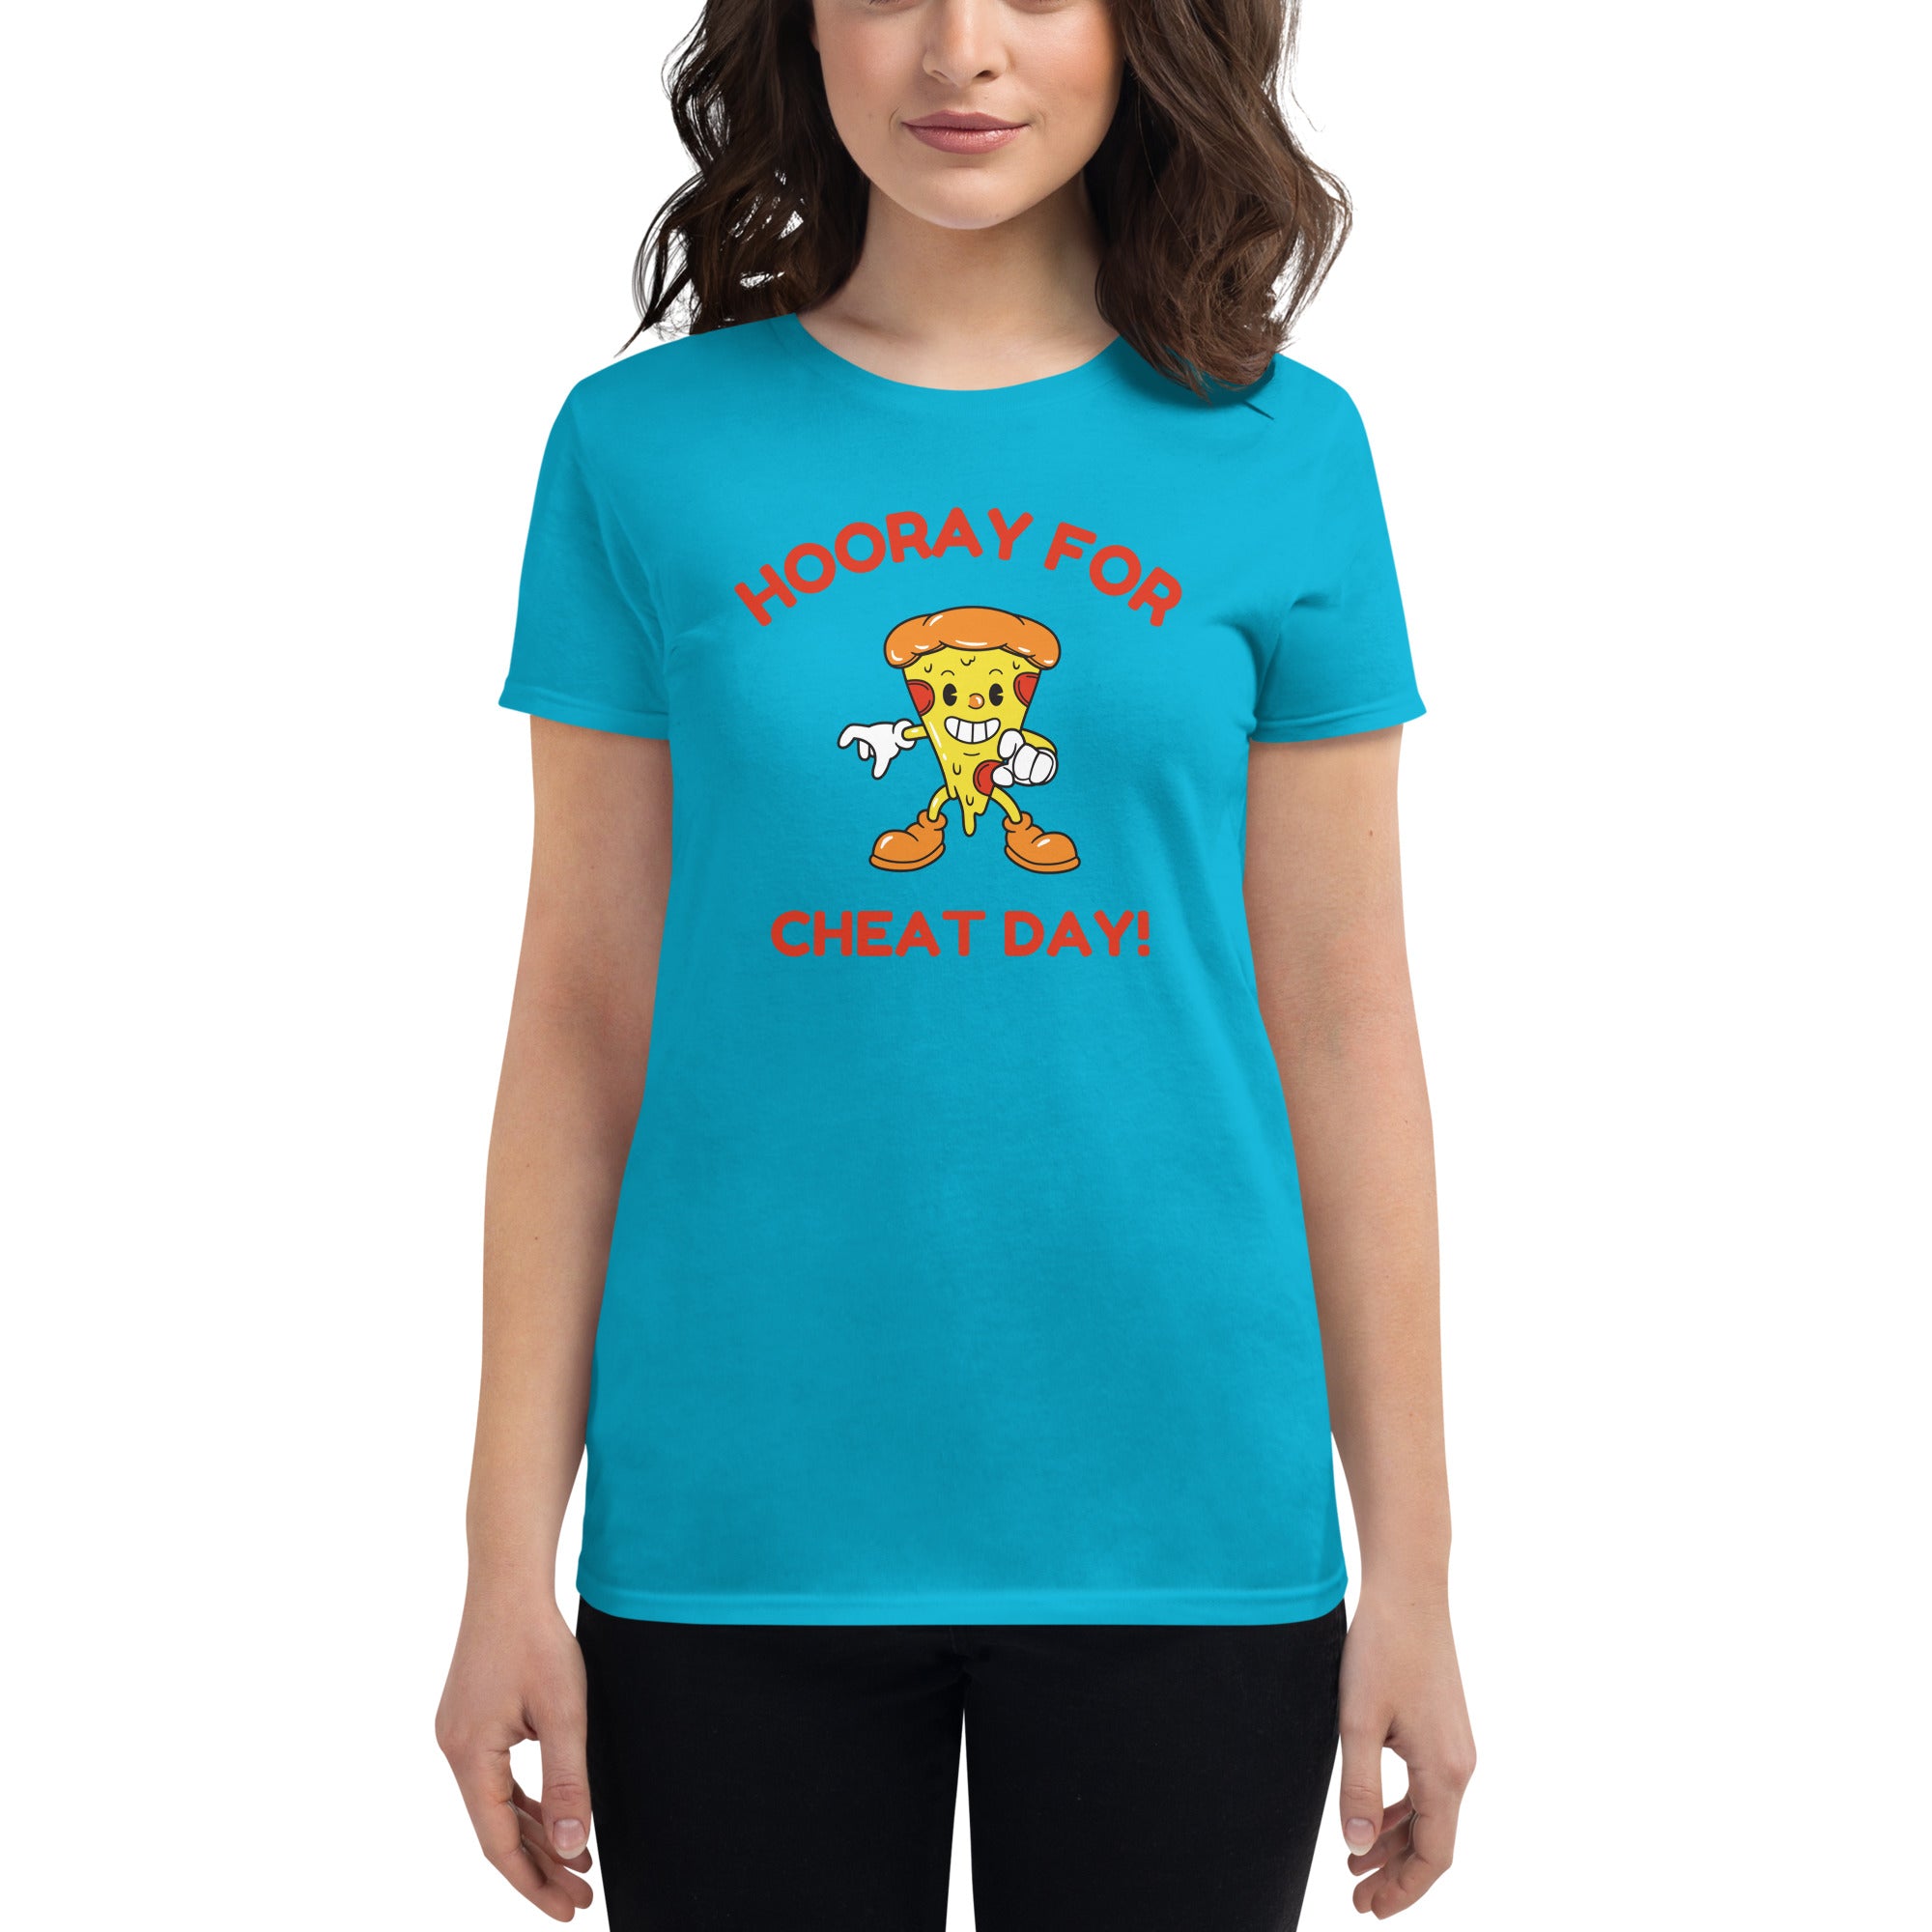 Hooray For Cheat Day! Women's Fitted T-Shirt